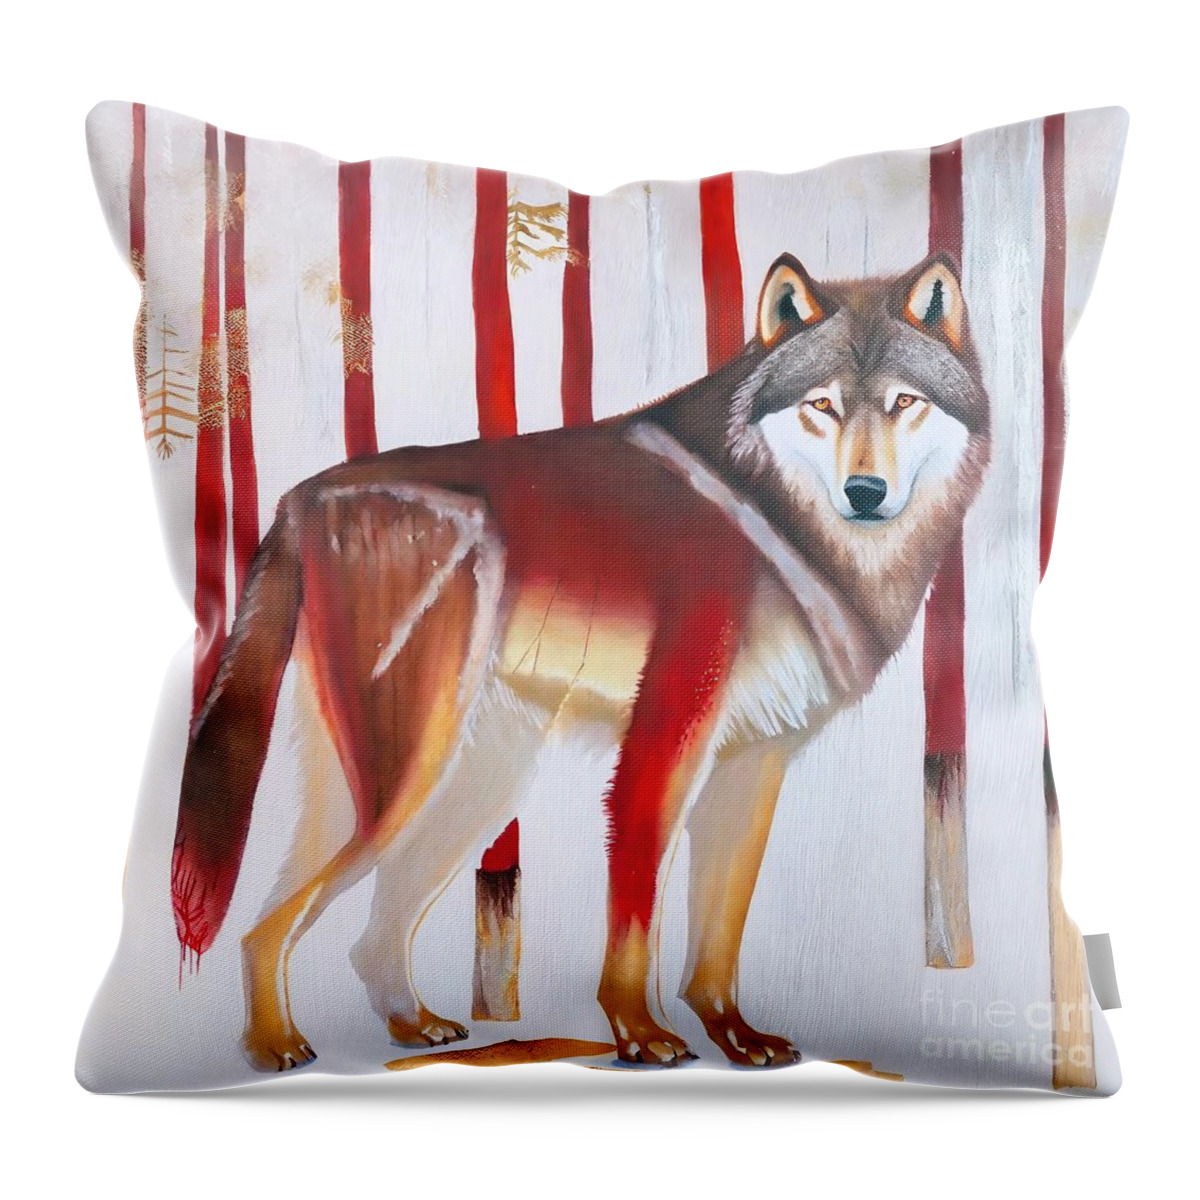 Wild Throw Pillow featuring the painting Painting Les Arbres Me Parlent De Toi wild art na by N Akkash